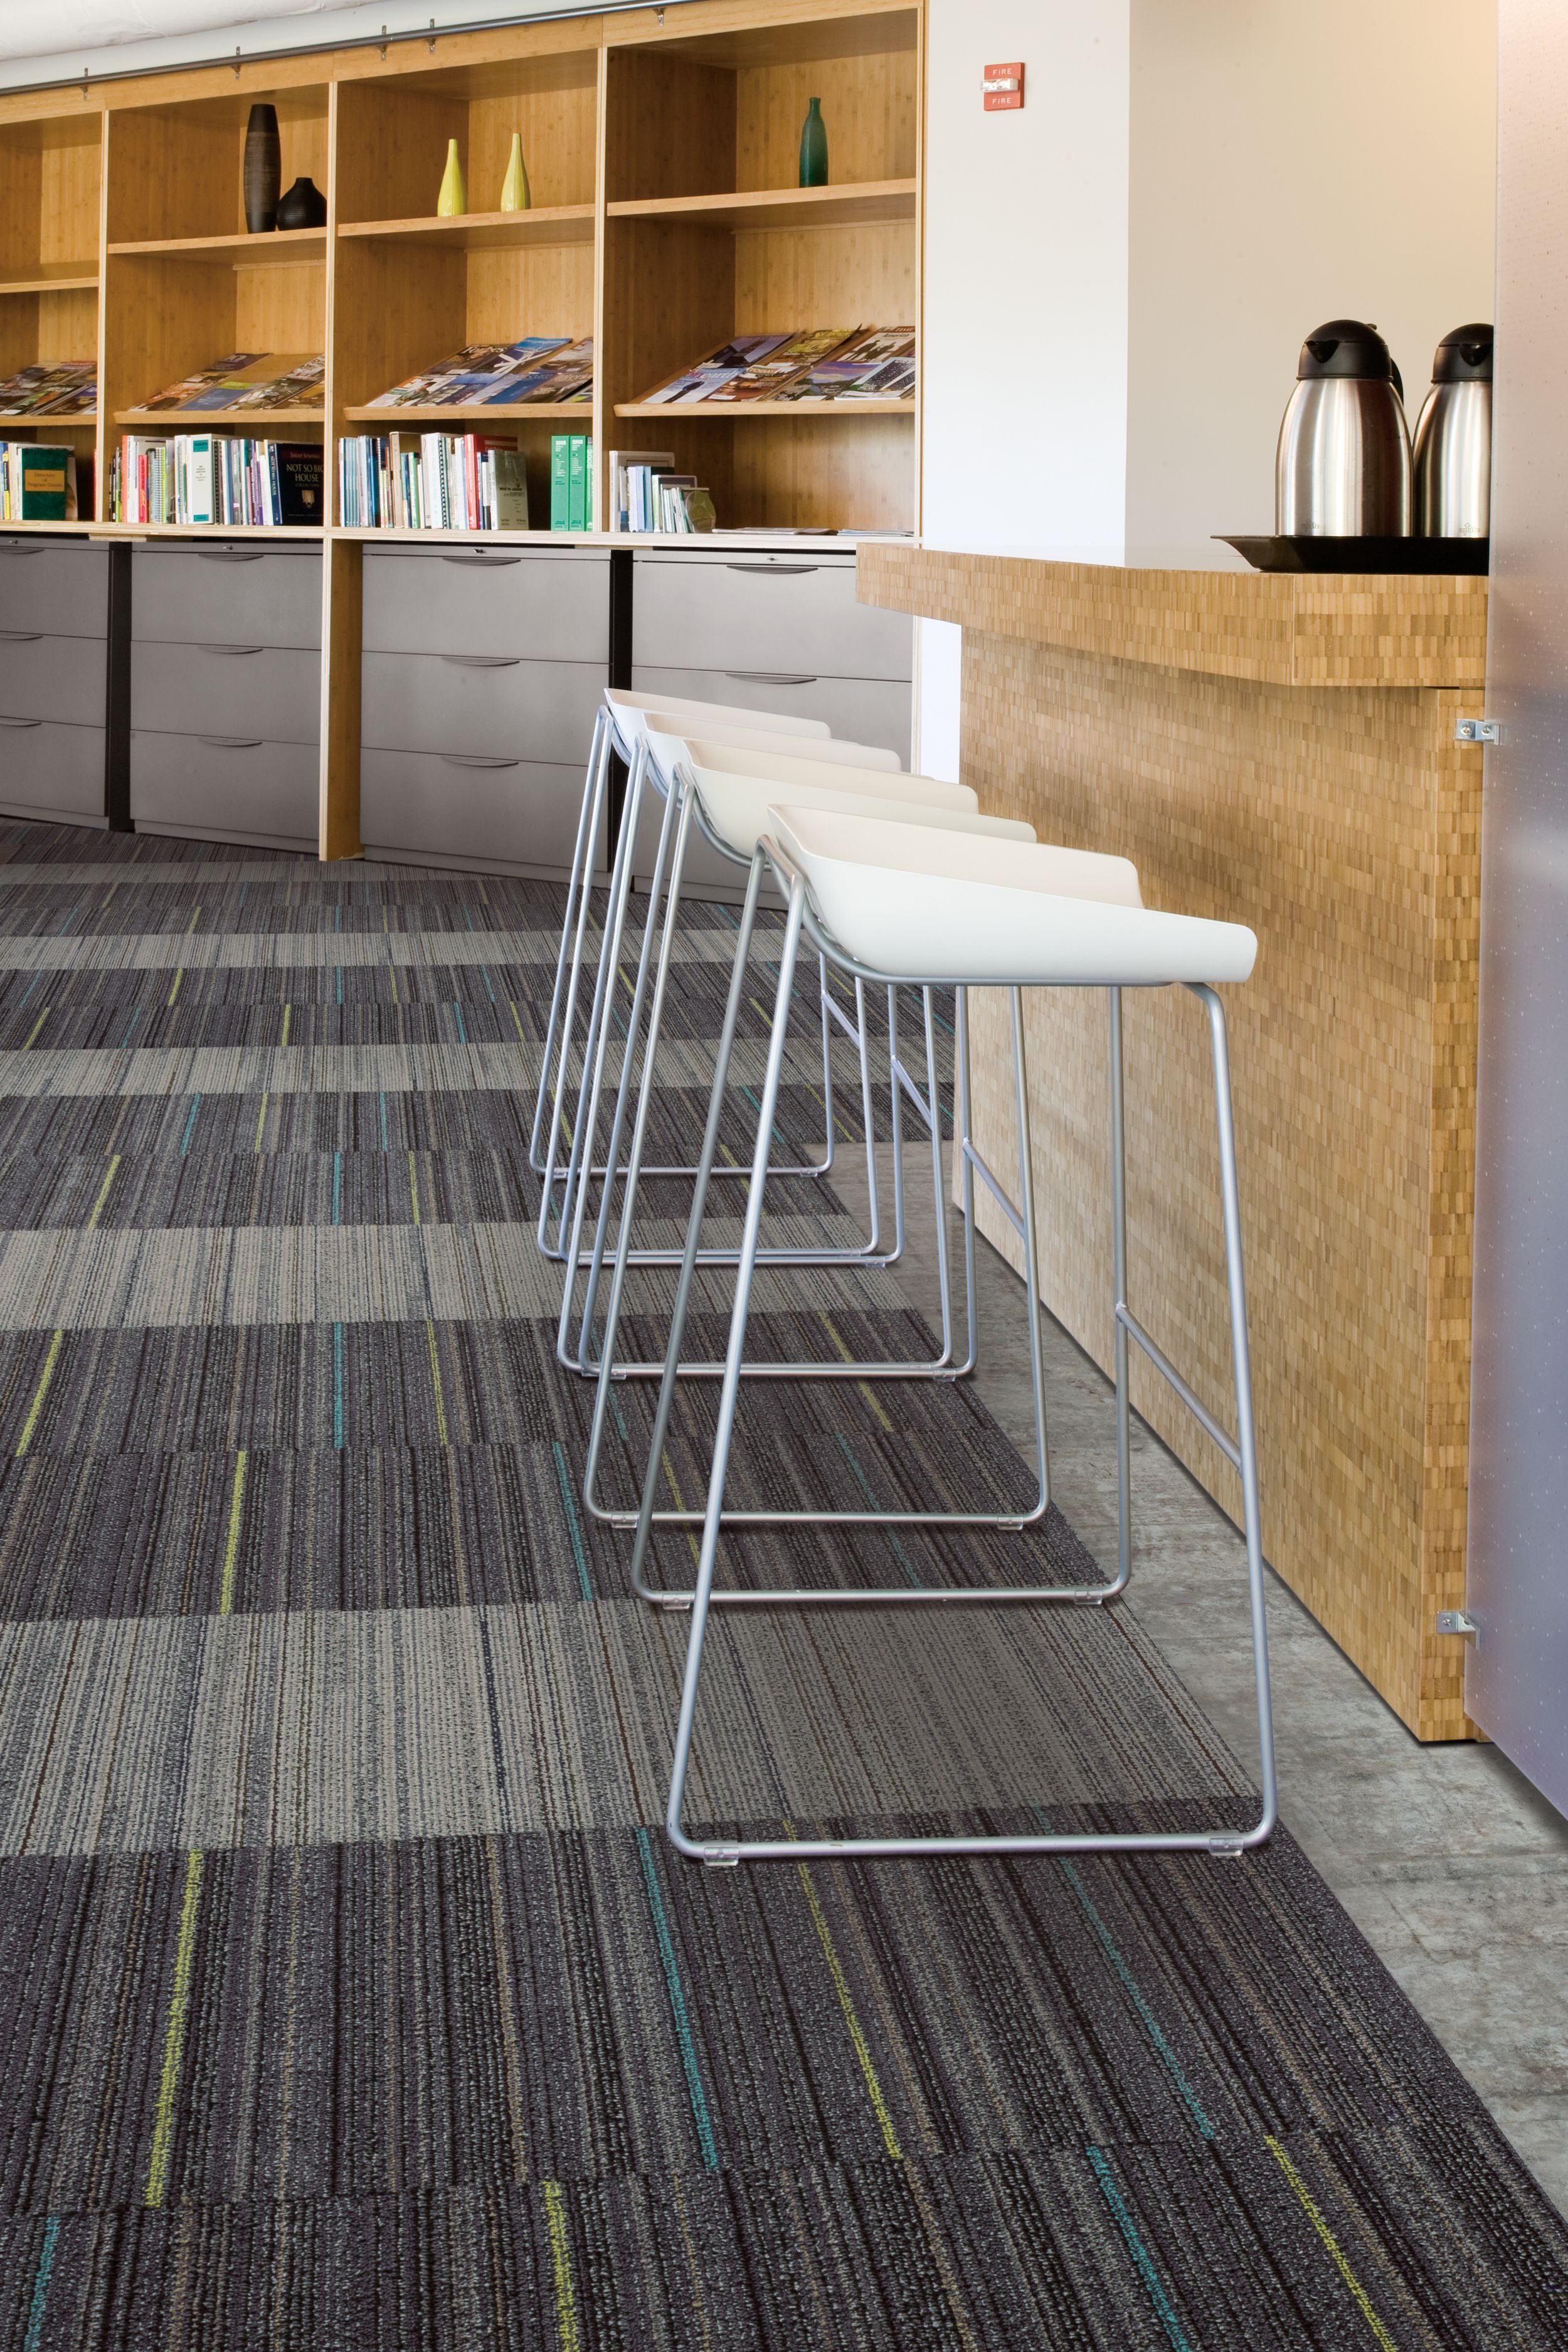 Interface Primary Stitch and Sew Straight carpet tile with Textured Stones LVT in cafe area with high top seating imagen número 8